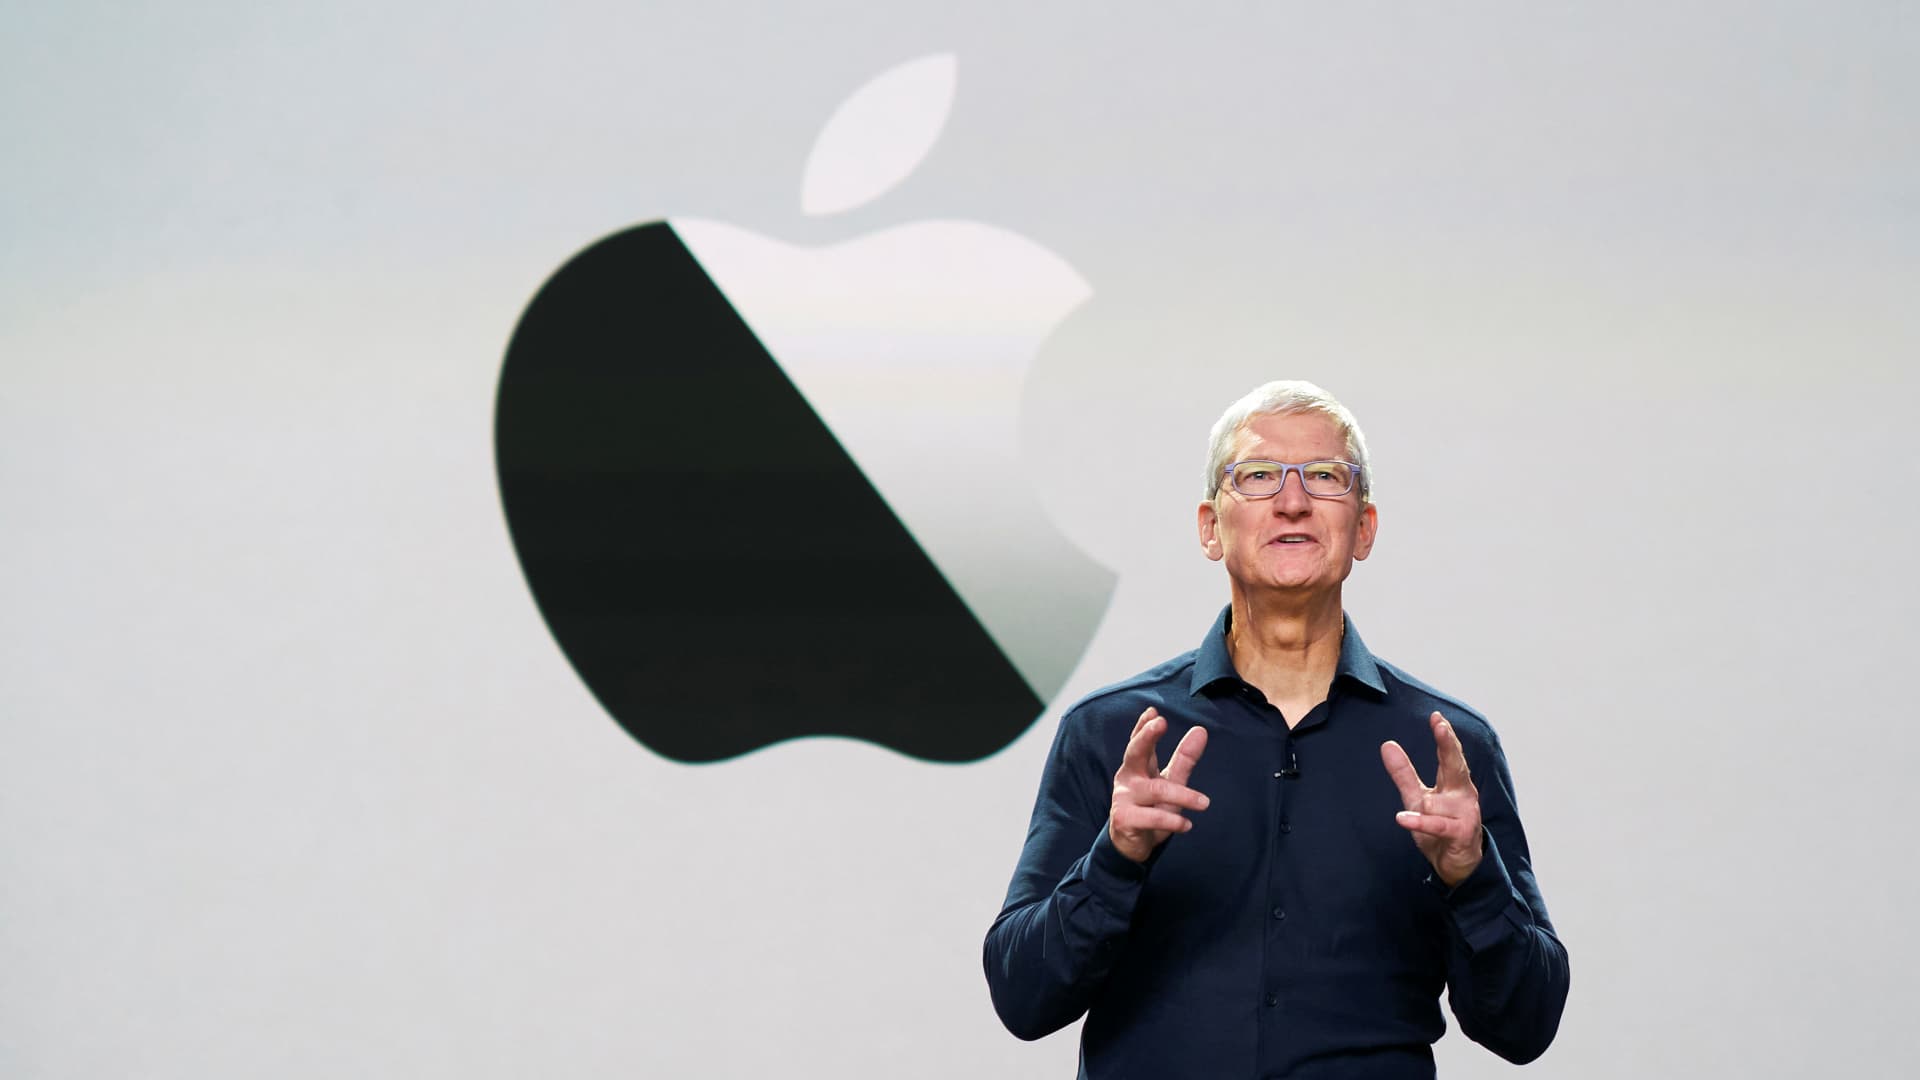 Apple CEO Tim Cook delivers the keynote address during the 2020 Apple Worldwide Developers Conference (WWDC) at Steve Jobs Theater in Cupertino, California.